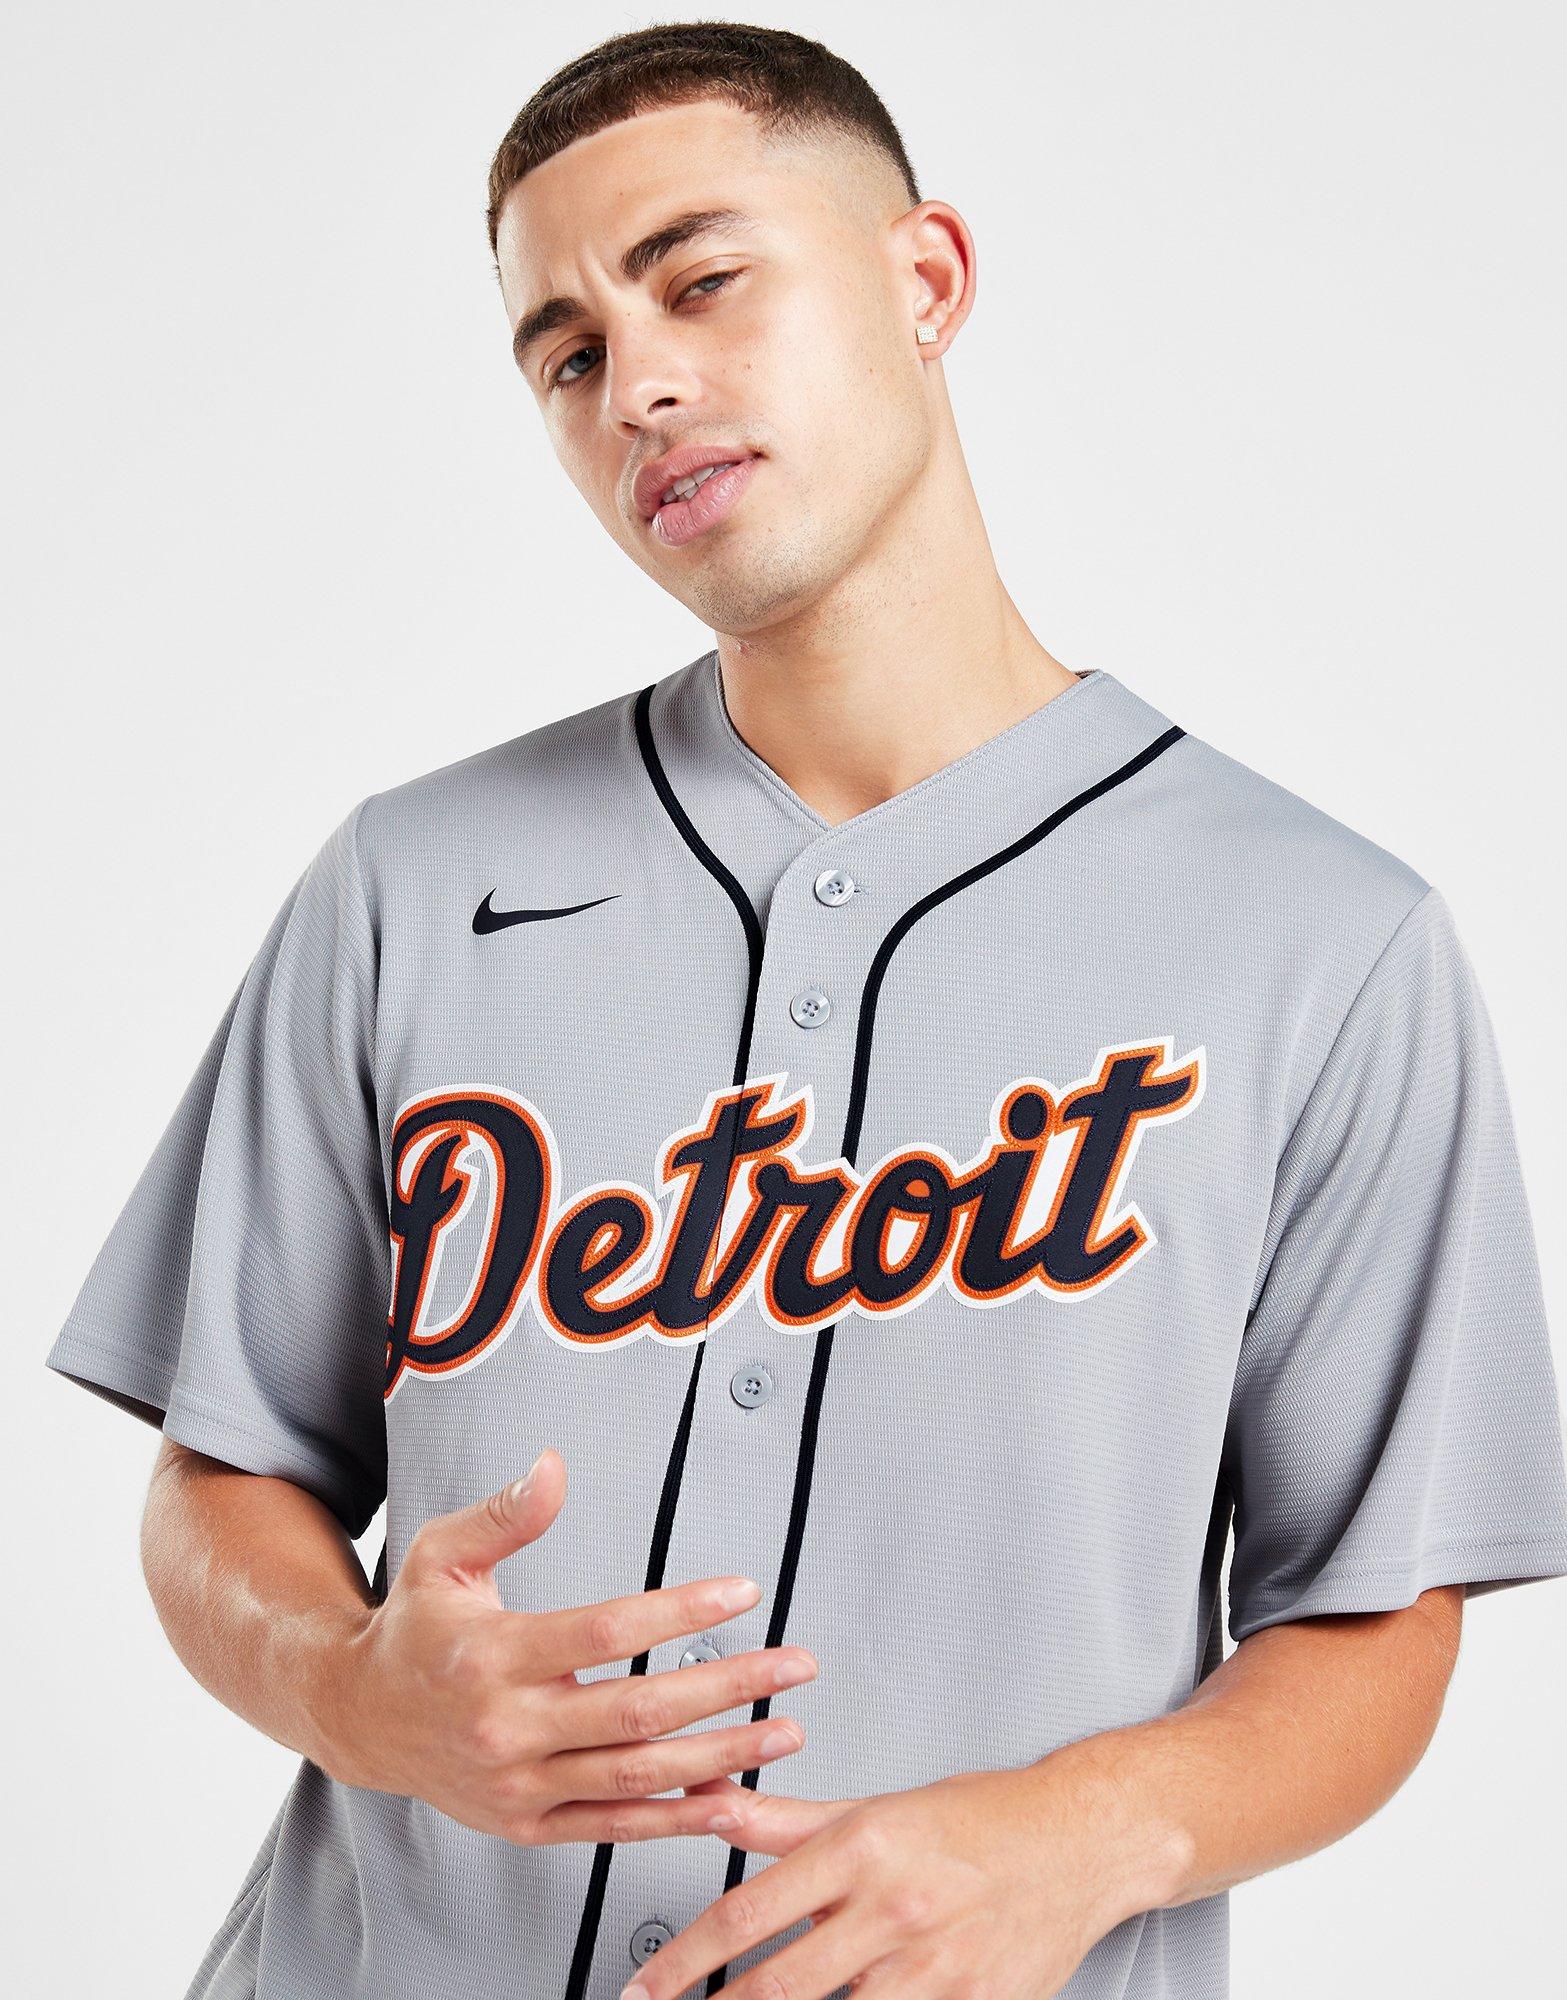 For A Cool $1 Billion, MLB Adds Nike Swoosh To Uniforms